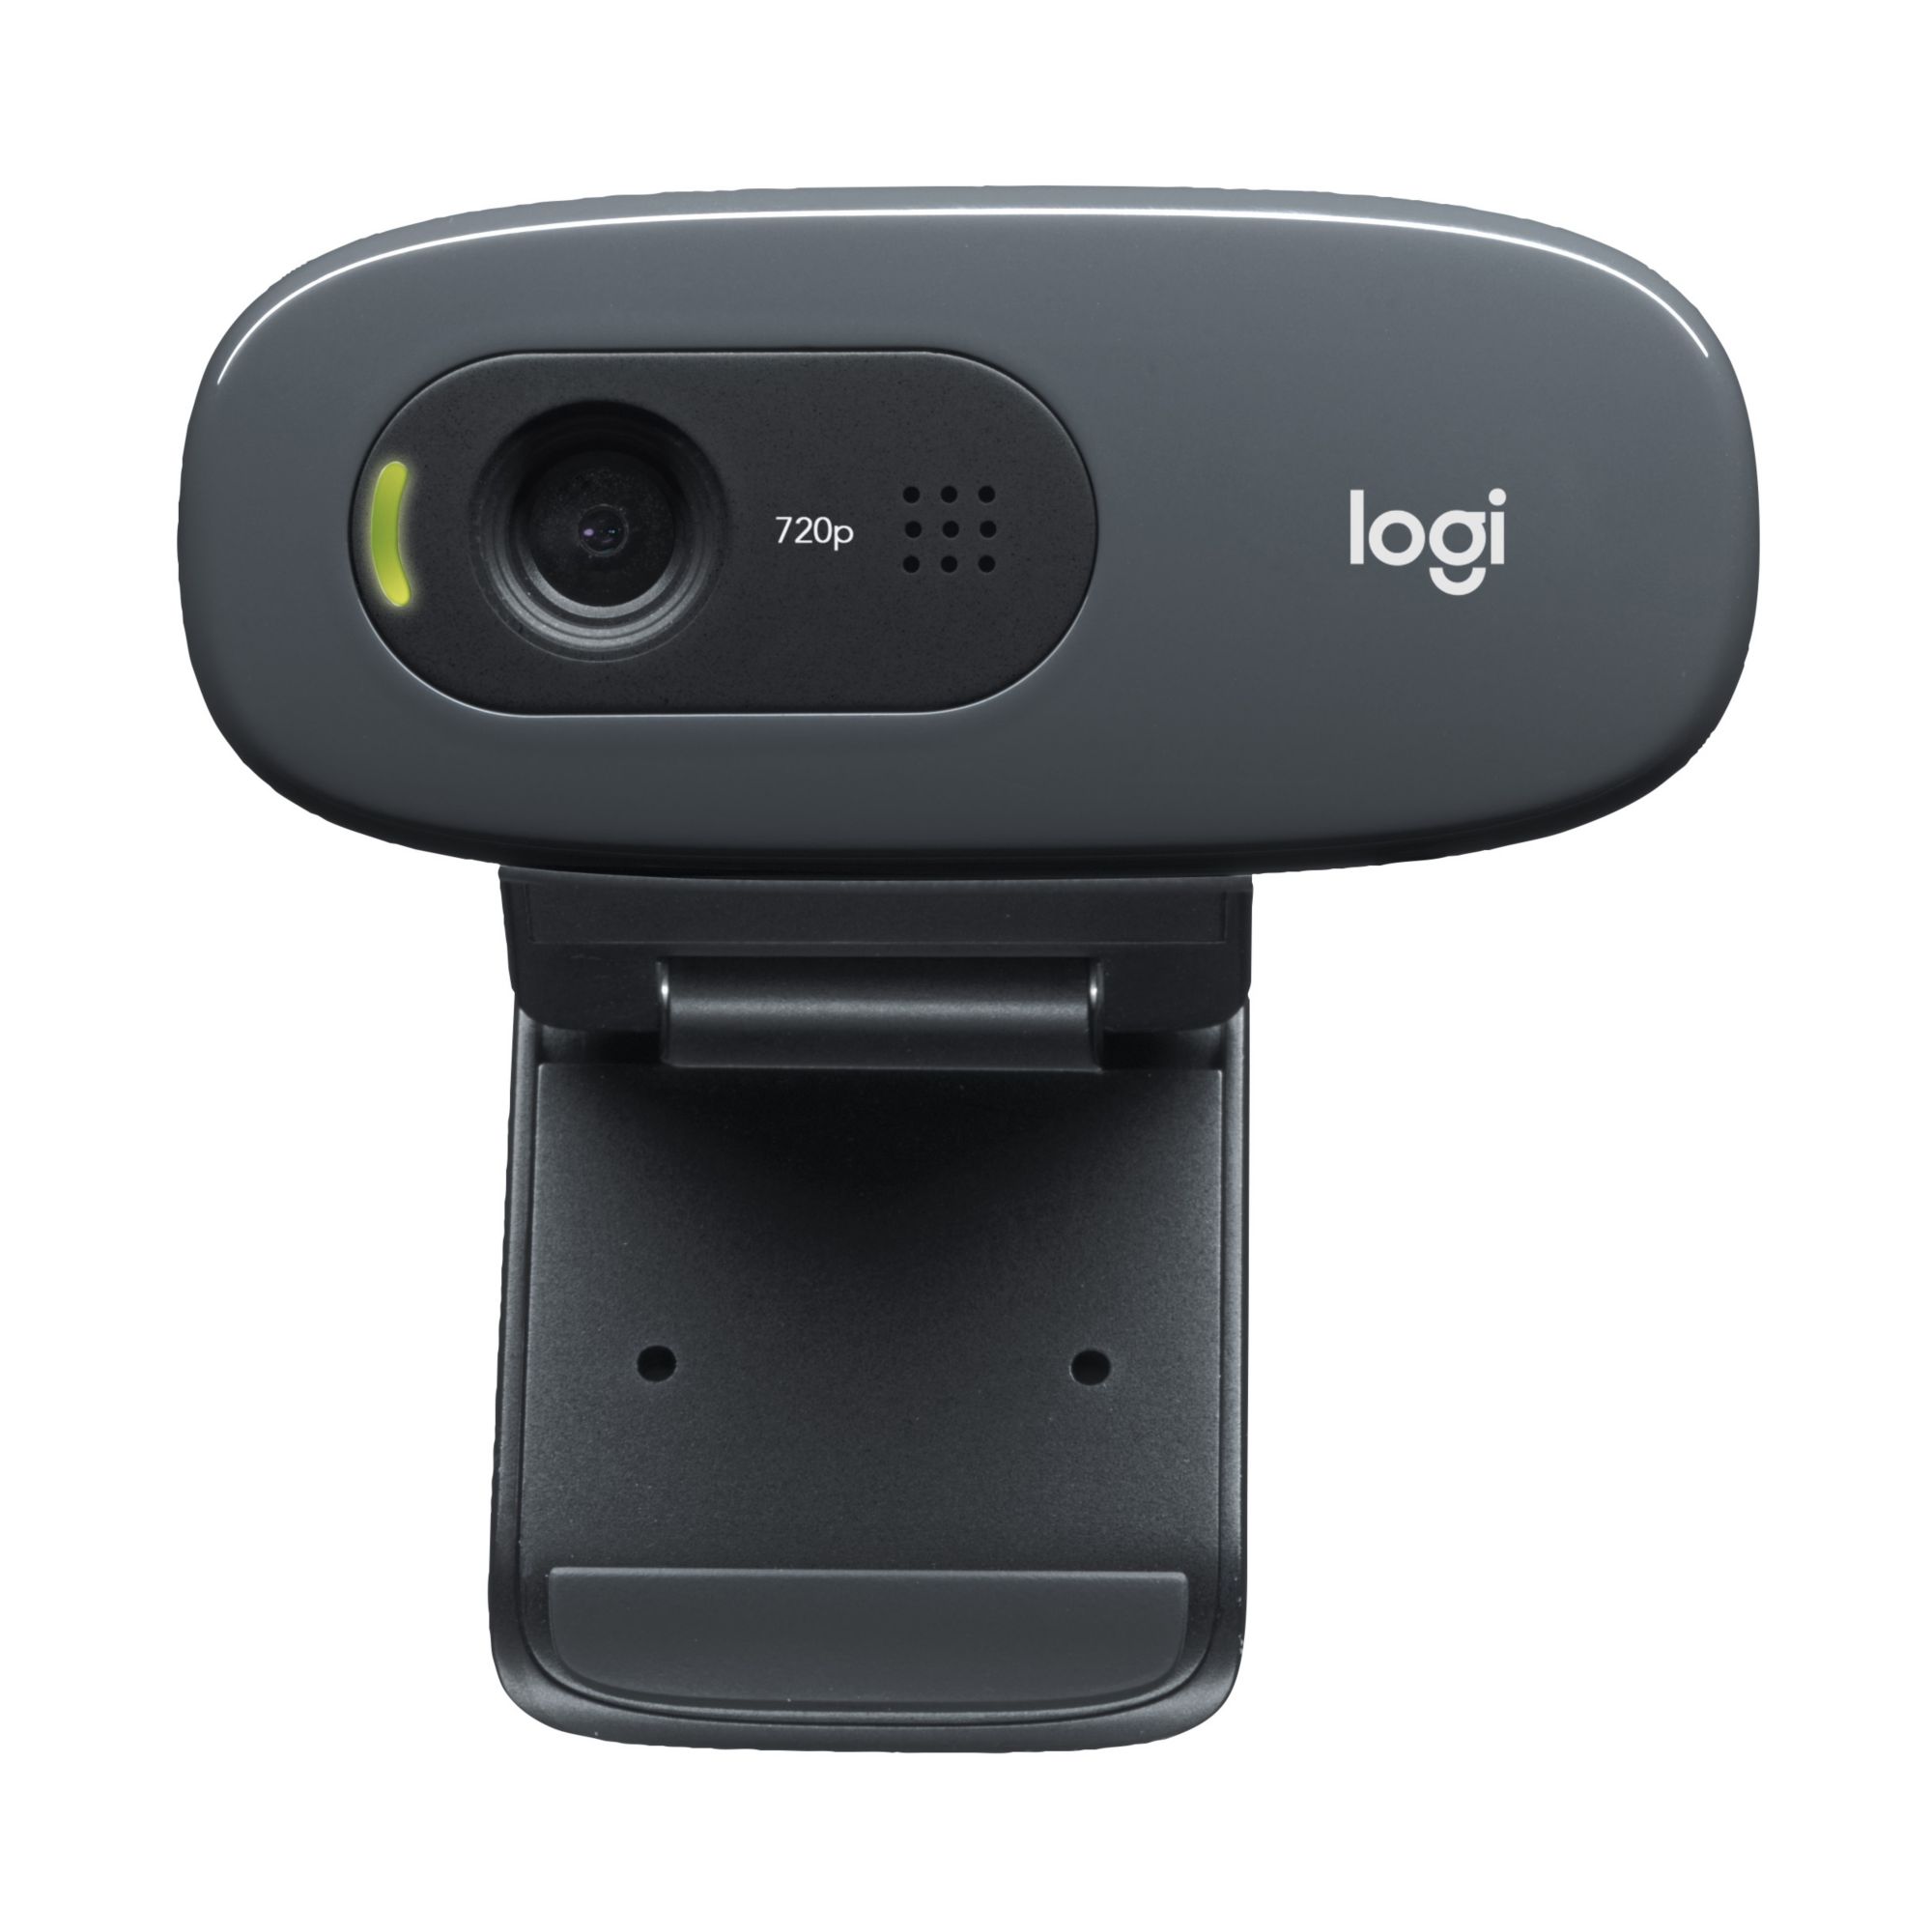 Basery 1080P plug & play Webcam with microphone for online